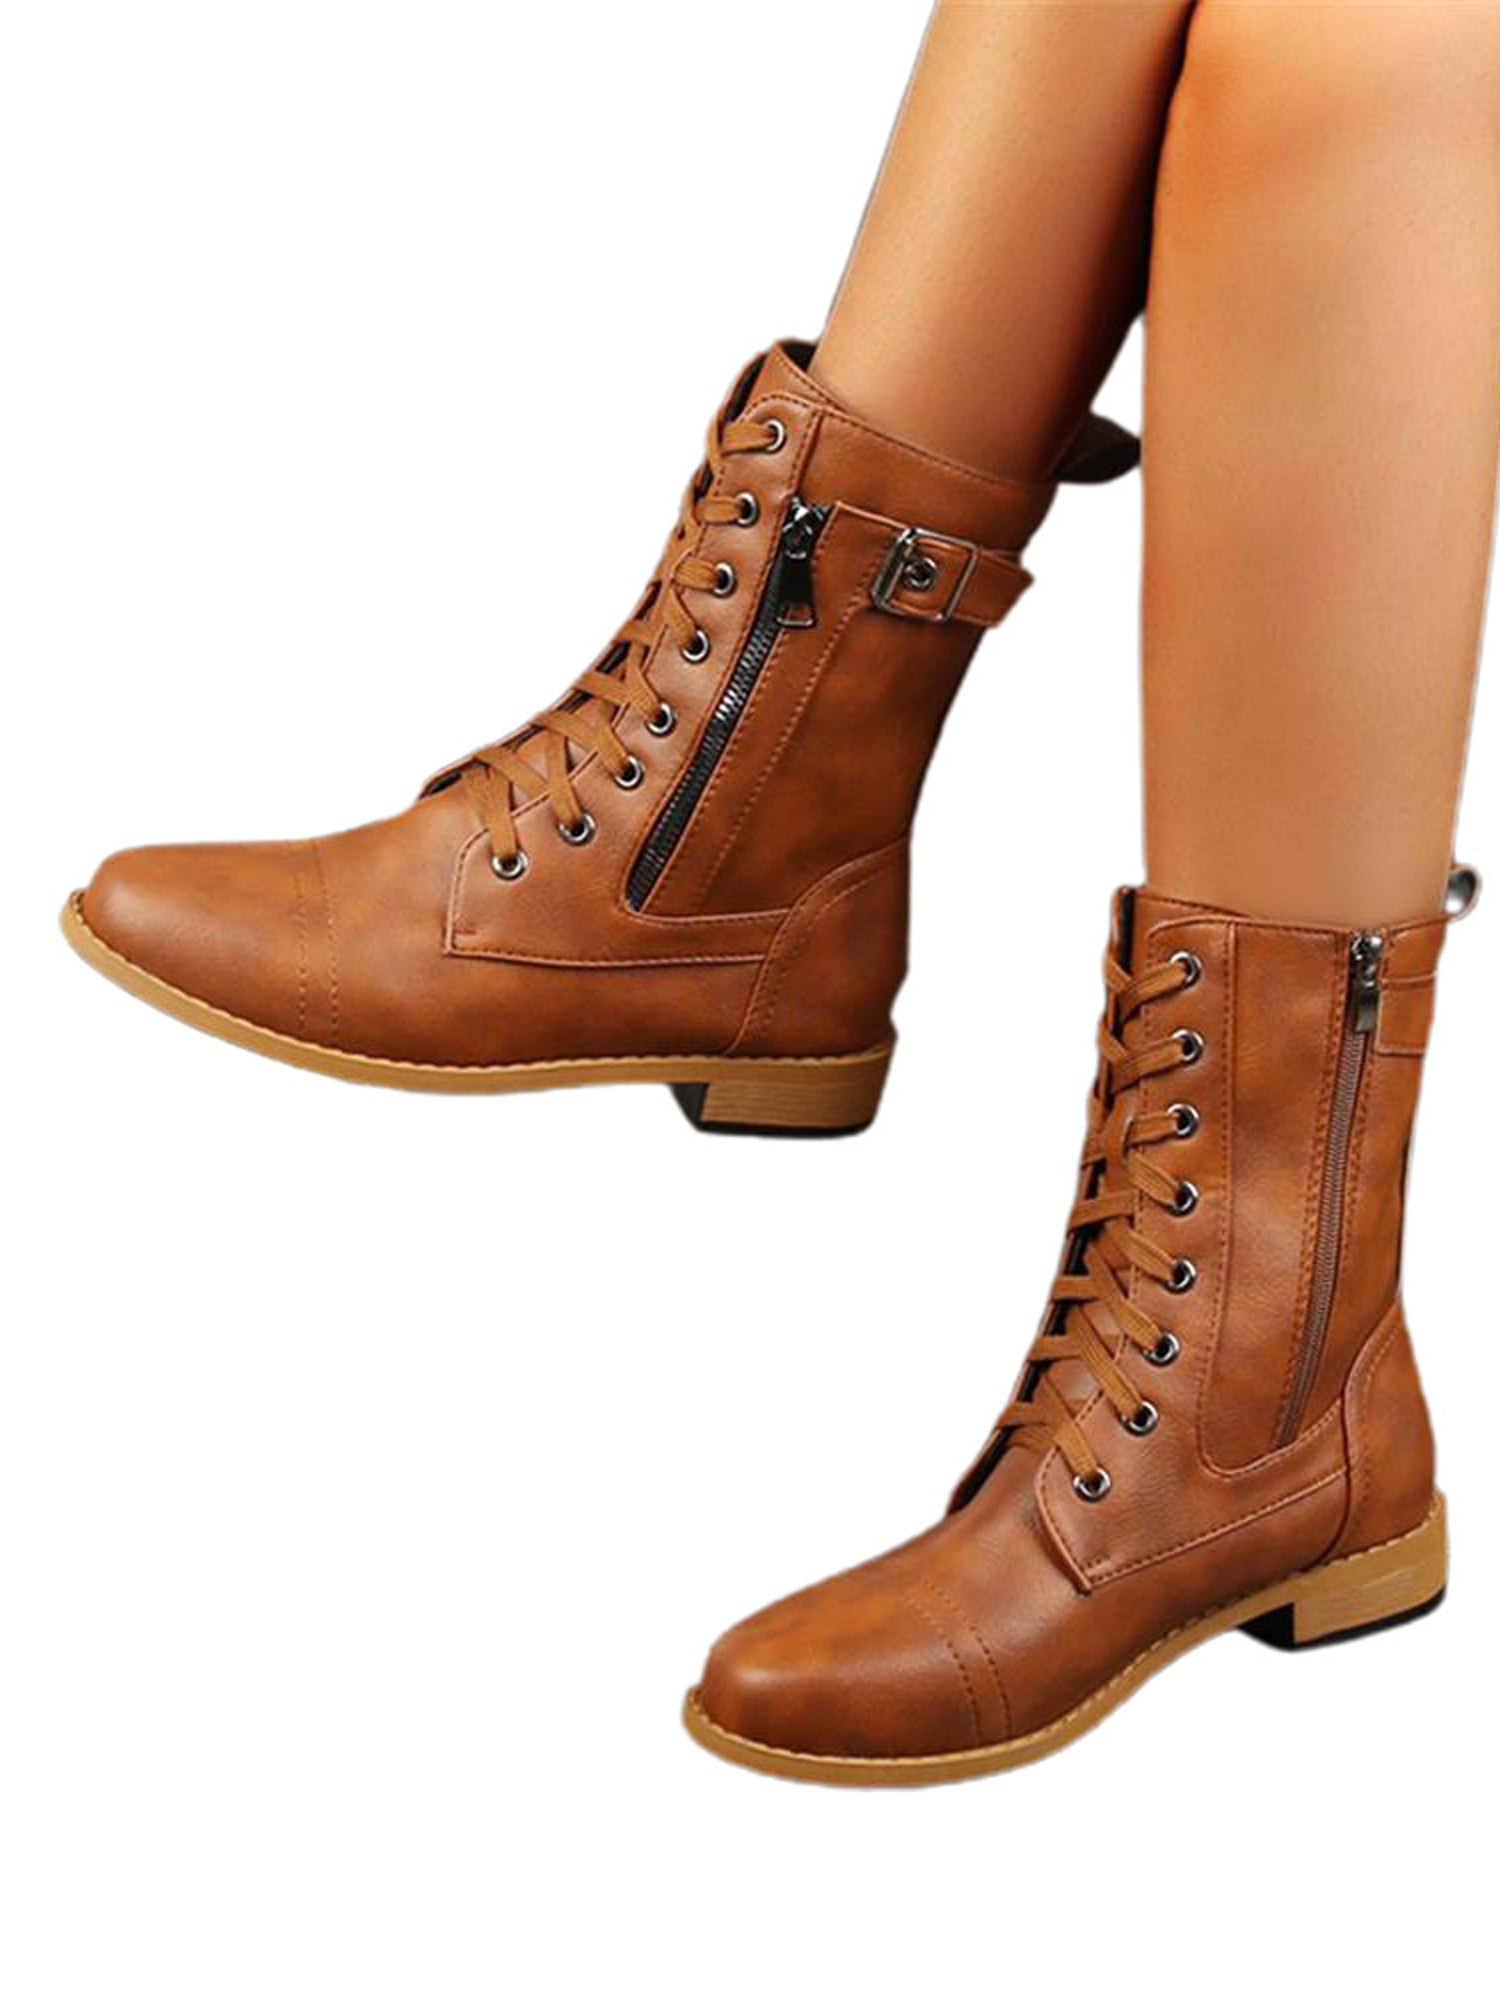 Casual Lace Up Women Lady Knee High Boots Cuban Heel Side Zipper Shoes Plus Size